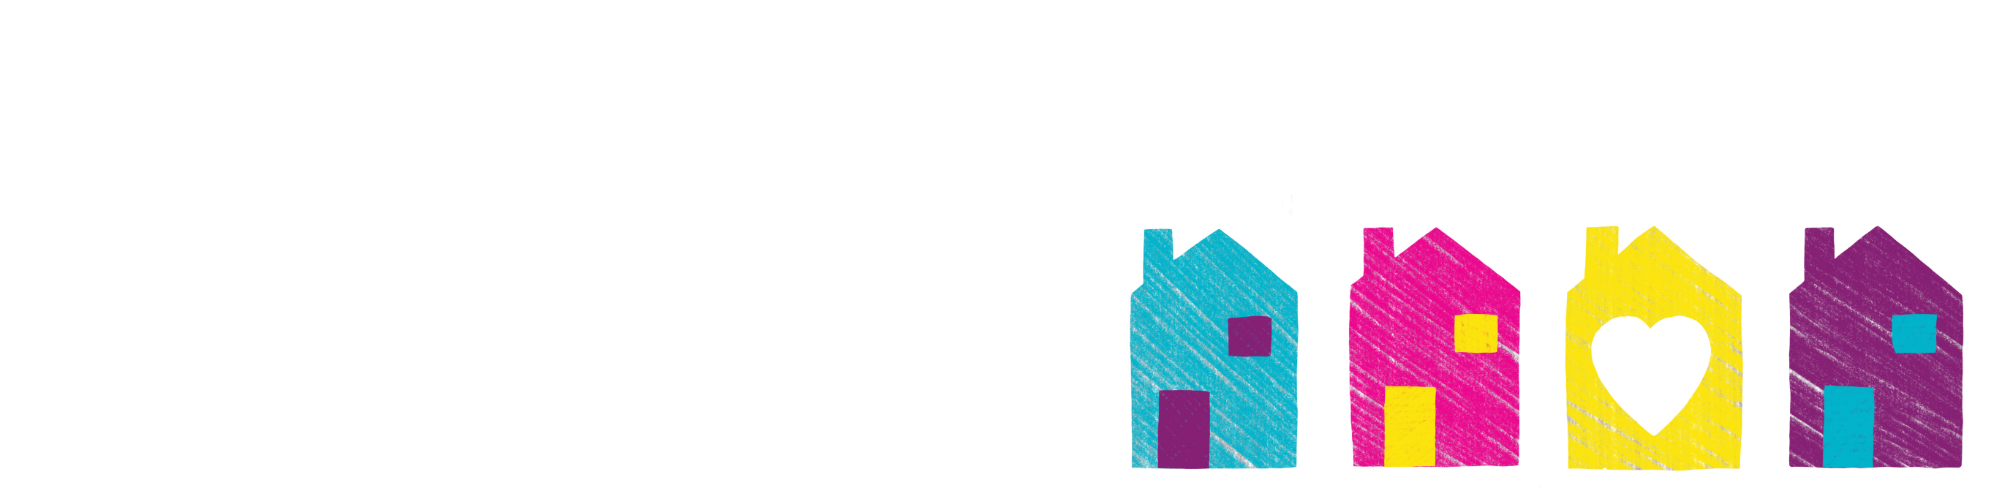 Good Neighbours logo.  4 coloured houses, one with a heart instead of windows.